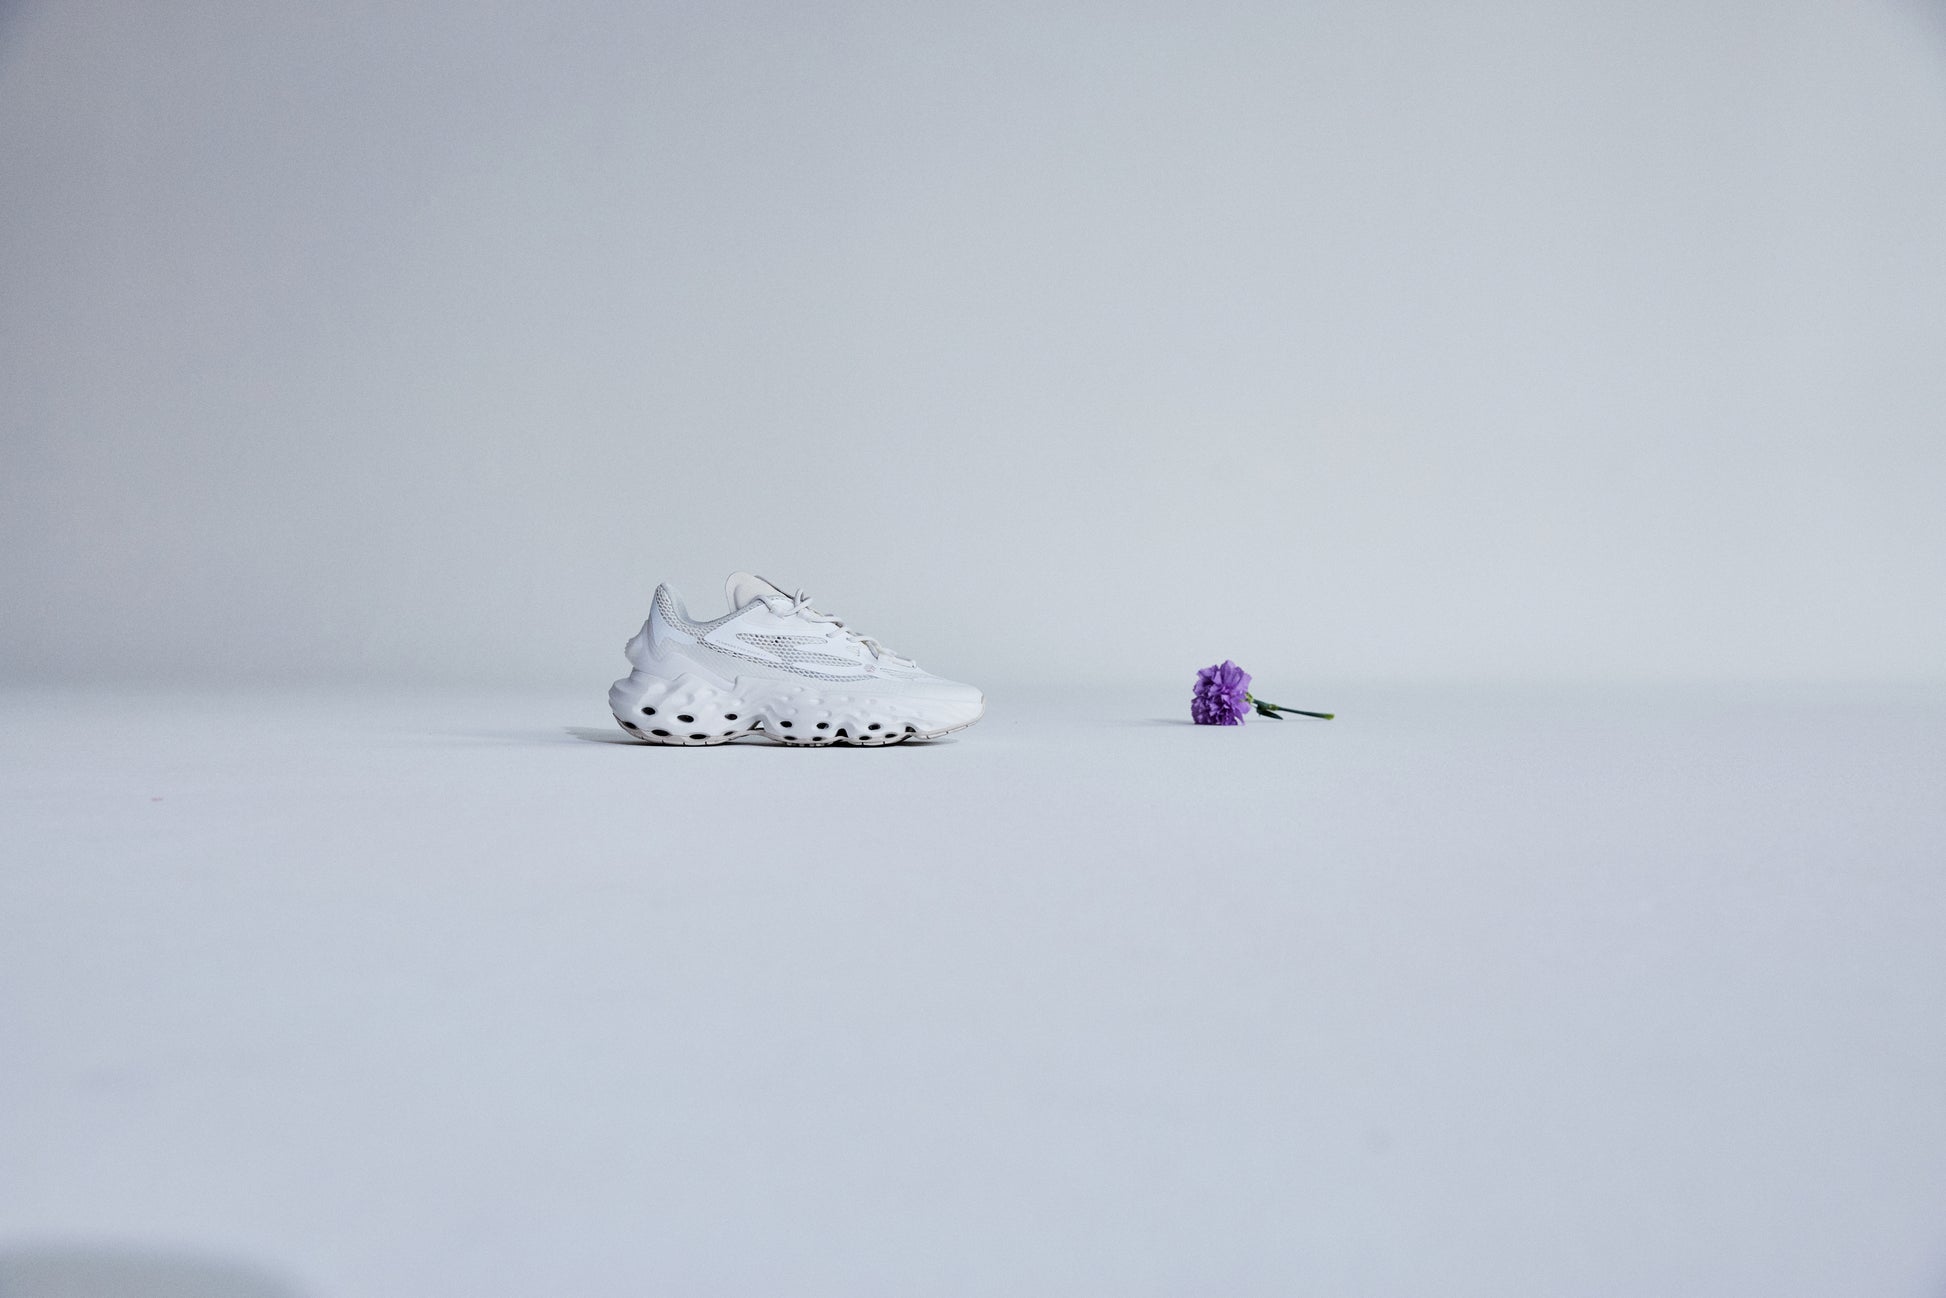 The shoe Seed.One in the colorway White Lily from the lateral side, with a purple flower placed to it's right.